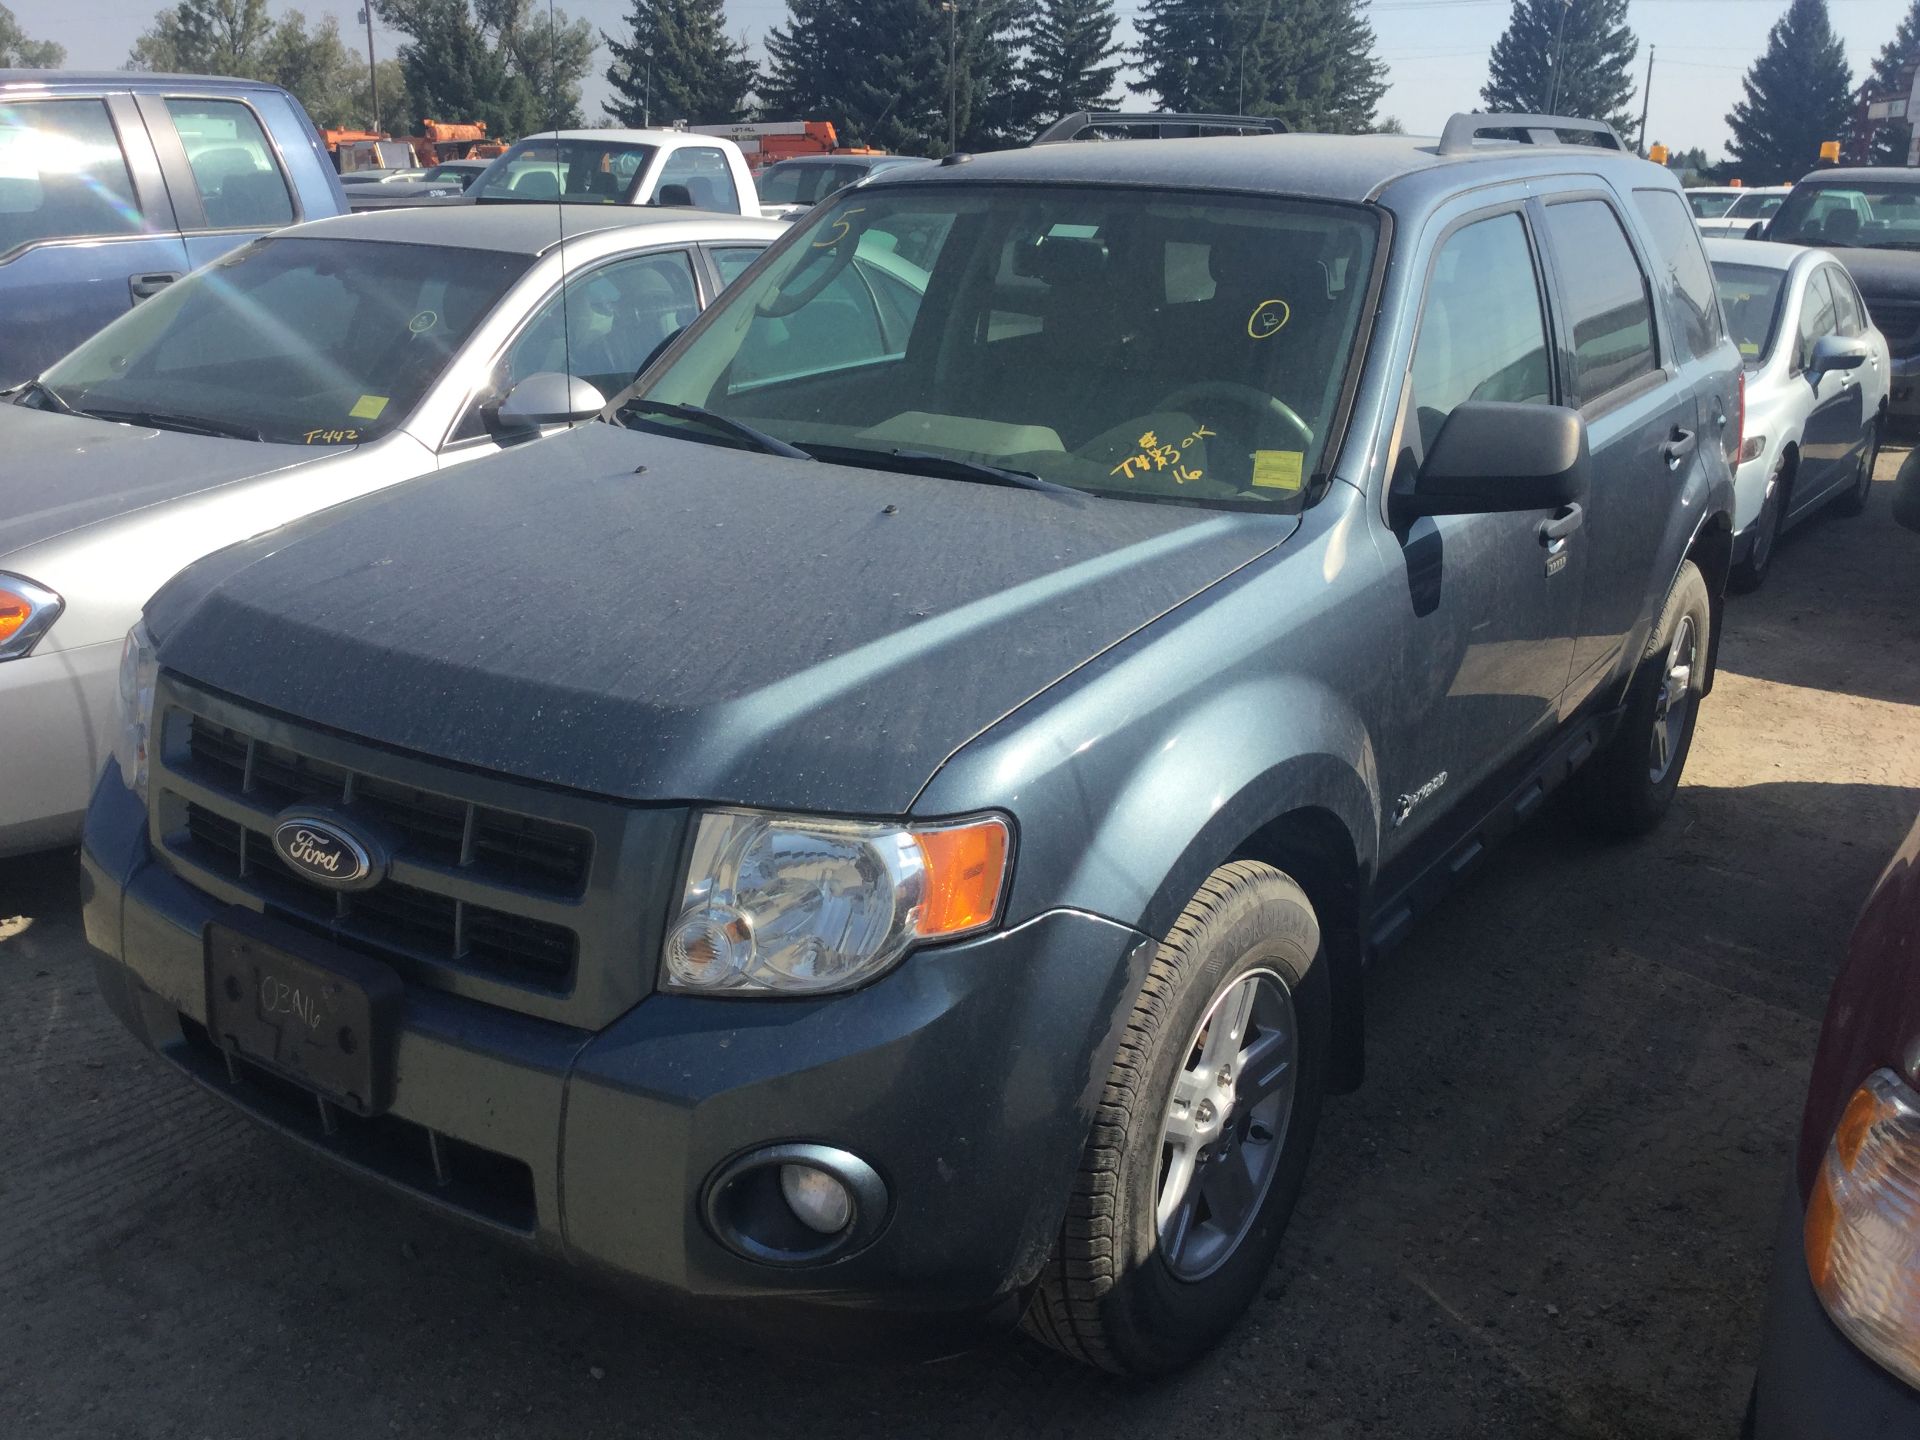 Year: 2010 Make: Ford Model: Escape Hybrid Type: SUV Vin#: C05664 Mileage/Hours: 173052 2.5L, AWD,